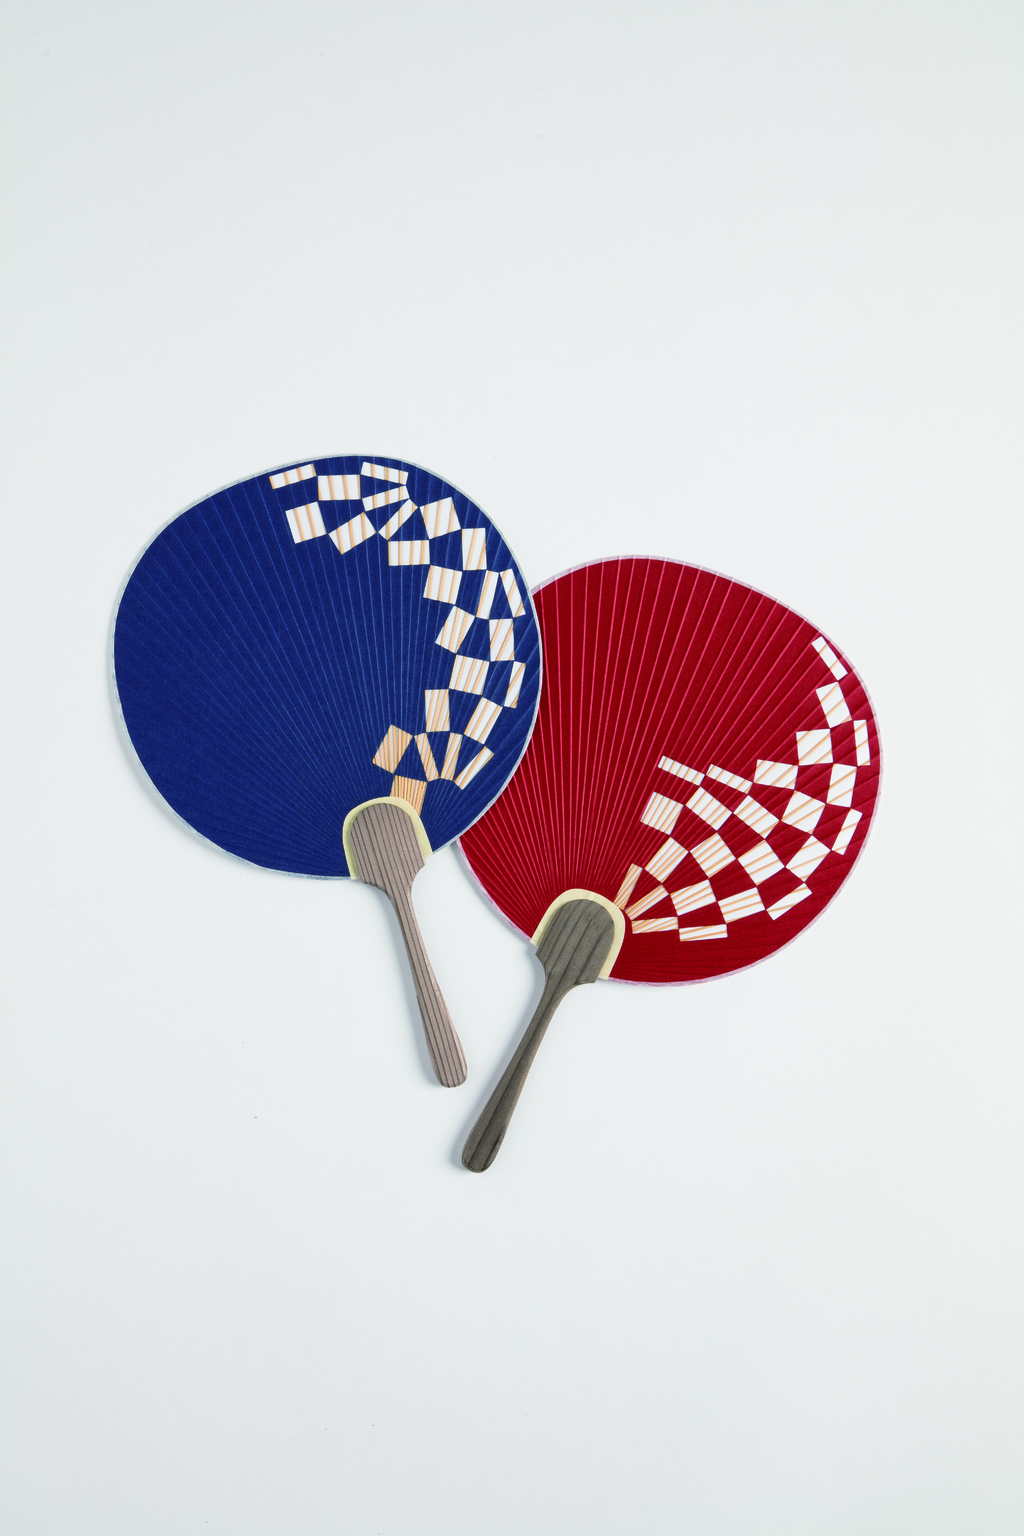 traditional crafts collection the 2020 tokyo olympics